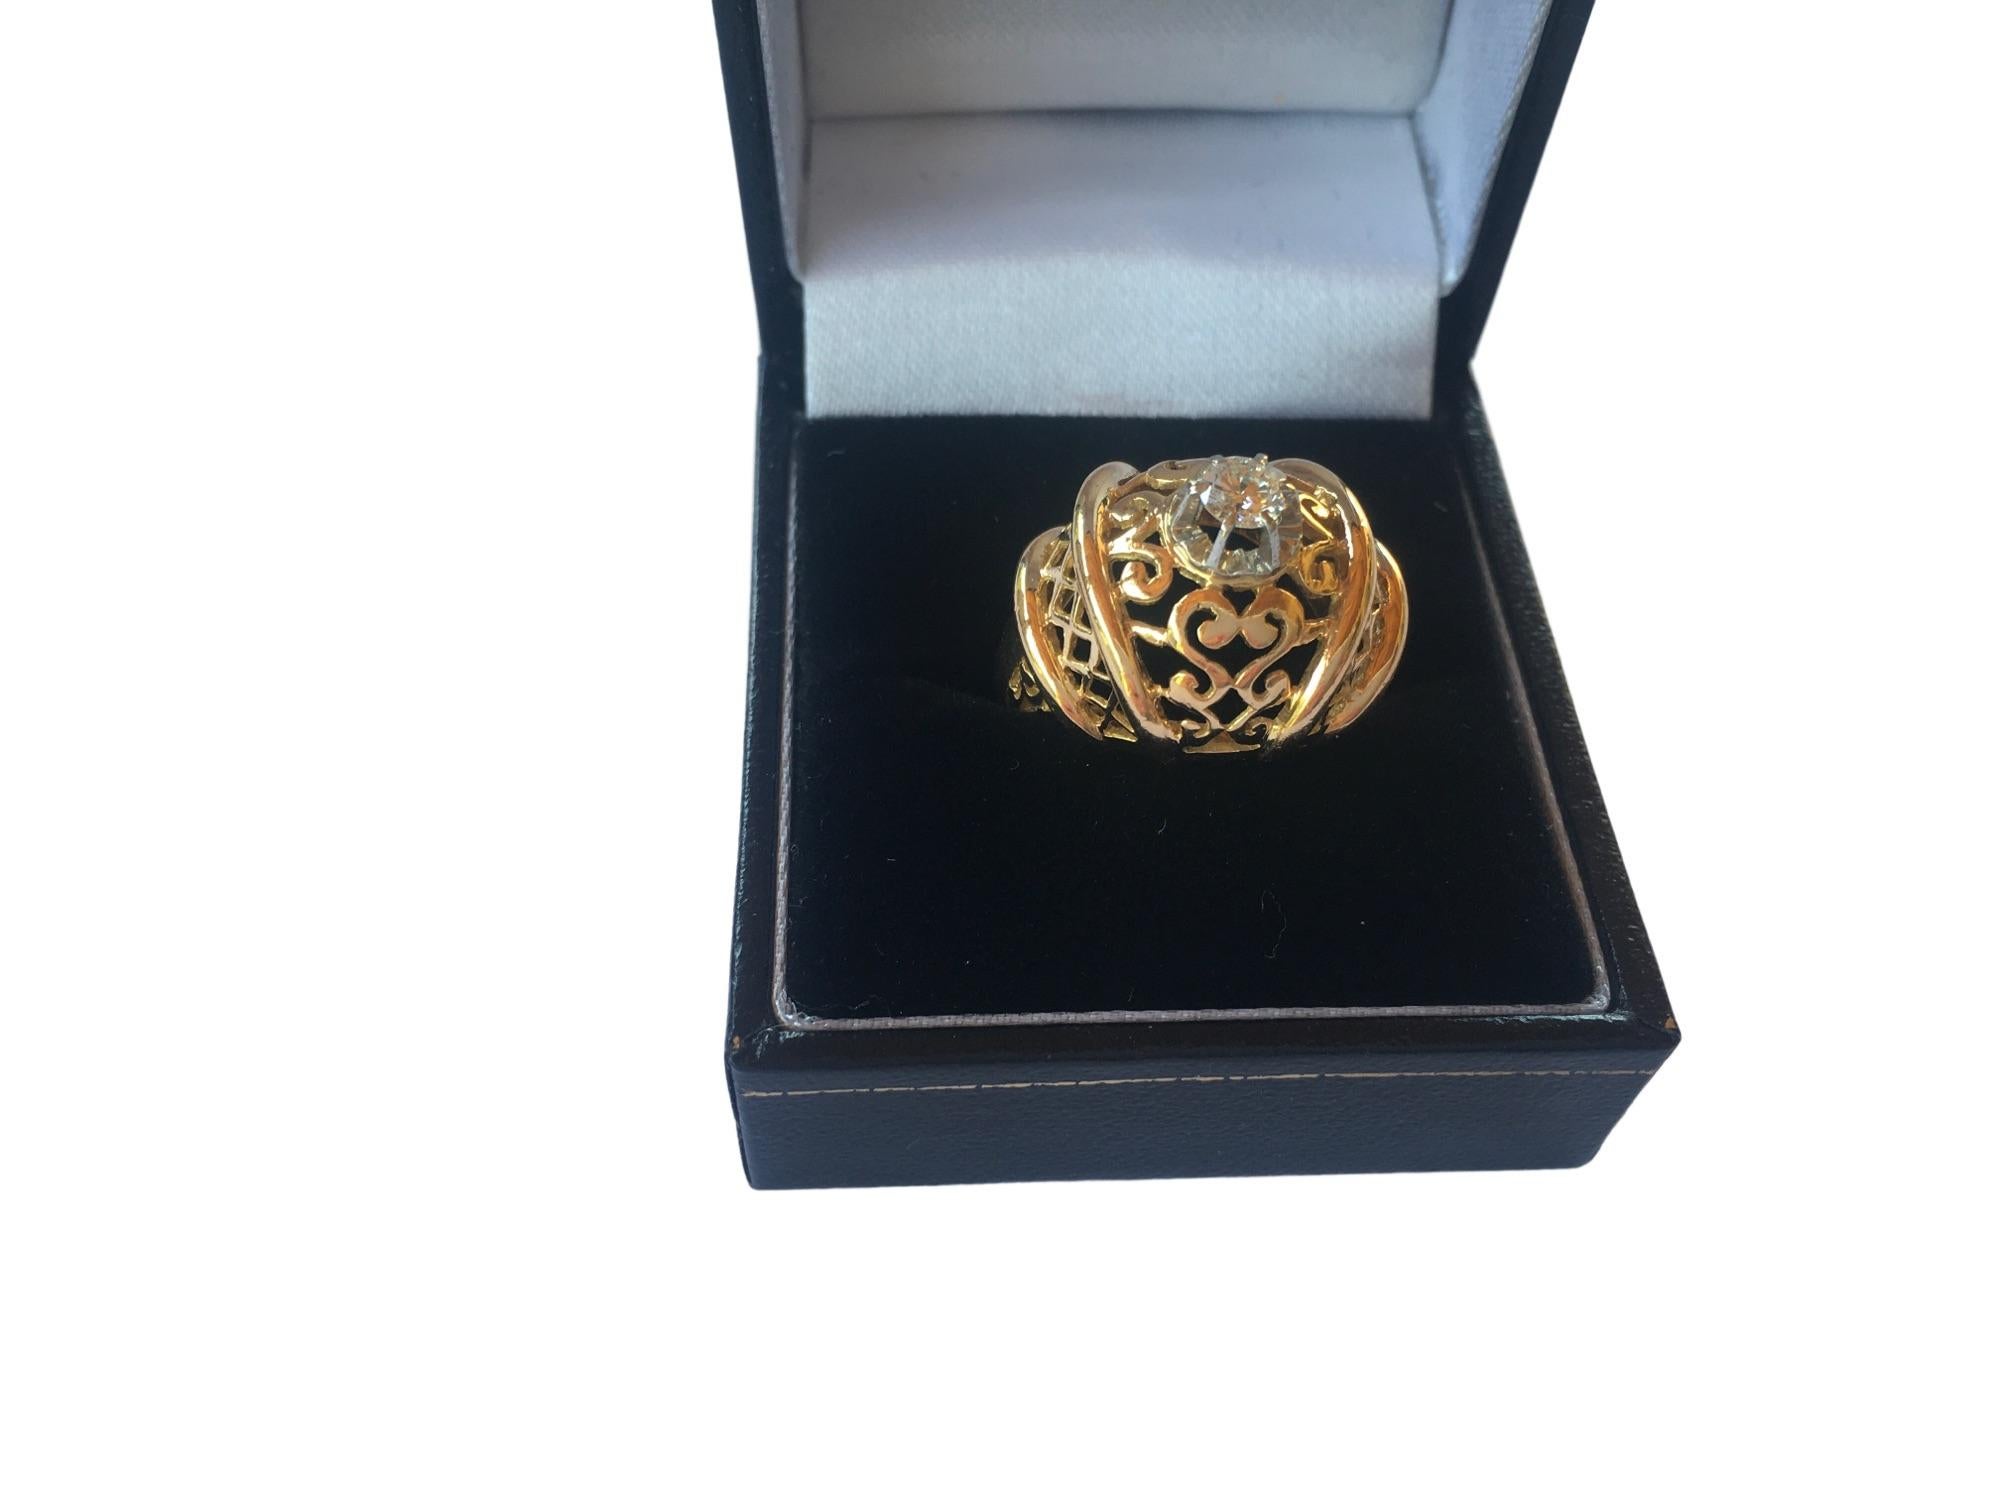 A stunning Art Deco french dome ring, set in 18 carat gold wit a solitaire diamond.
Weight of the diamond 0.20 ct
Hallmark with the eagles head for french gold.
Weight 9.5 grams 
size of the ring head 1.6 cm x 2 cm wide.

Ring size EU 50 US 5 UK K